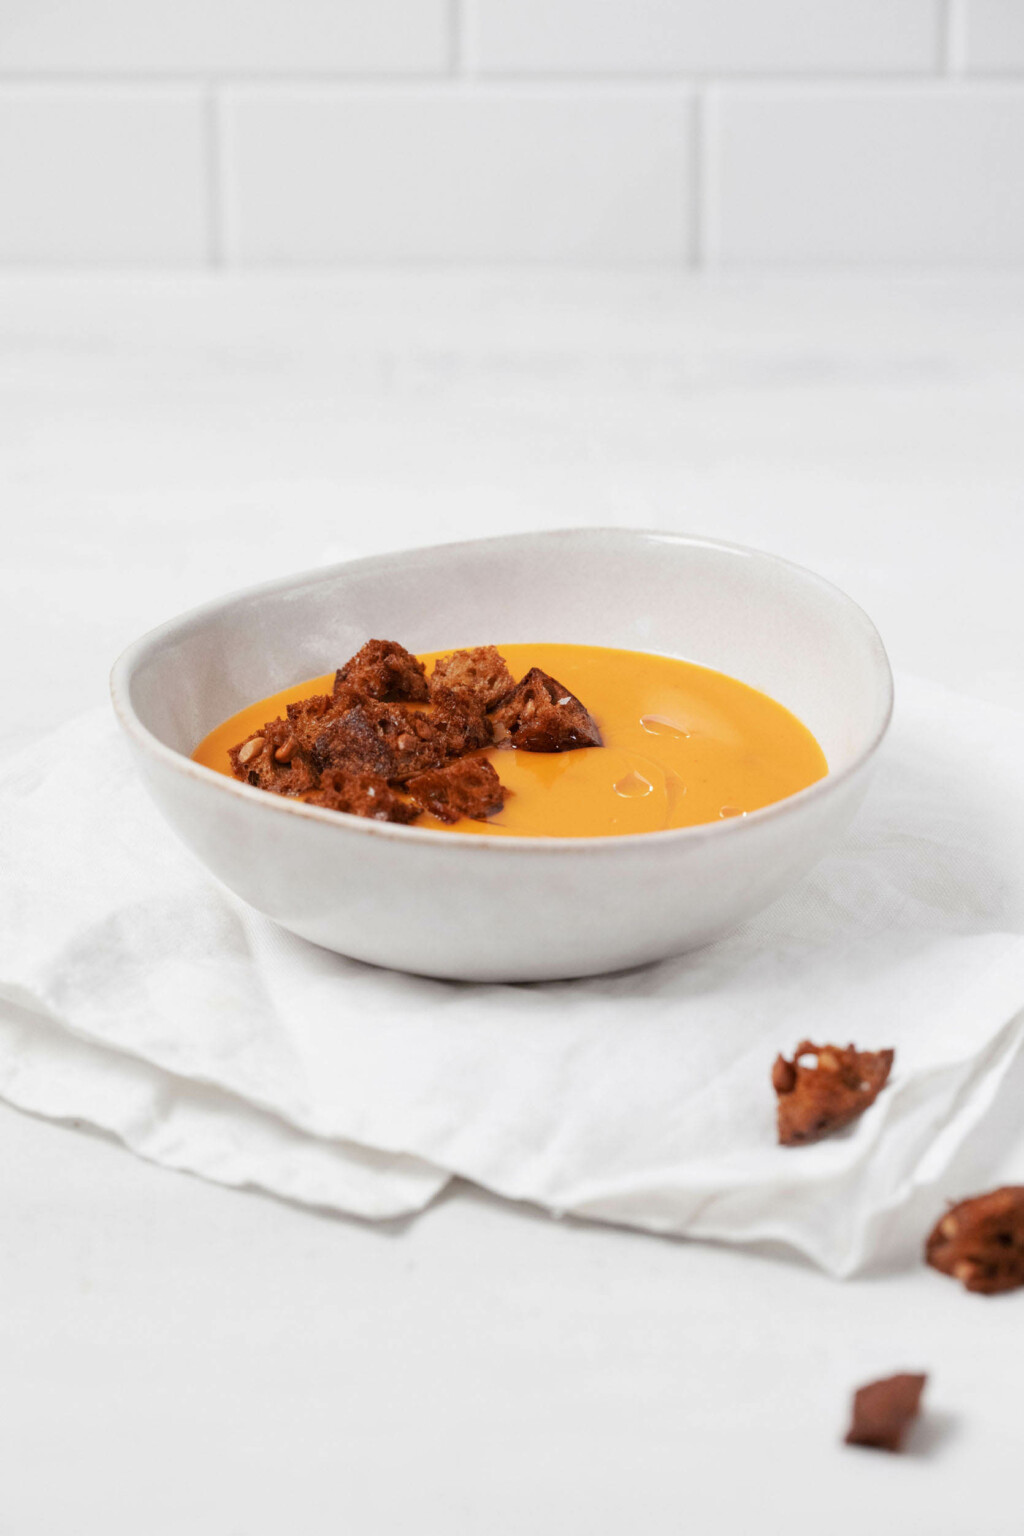 An asymmetrical, round bowl is resting on a light linen cloth. The bowl contains a creamy vegan butternut squash soup.